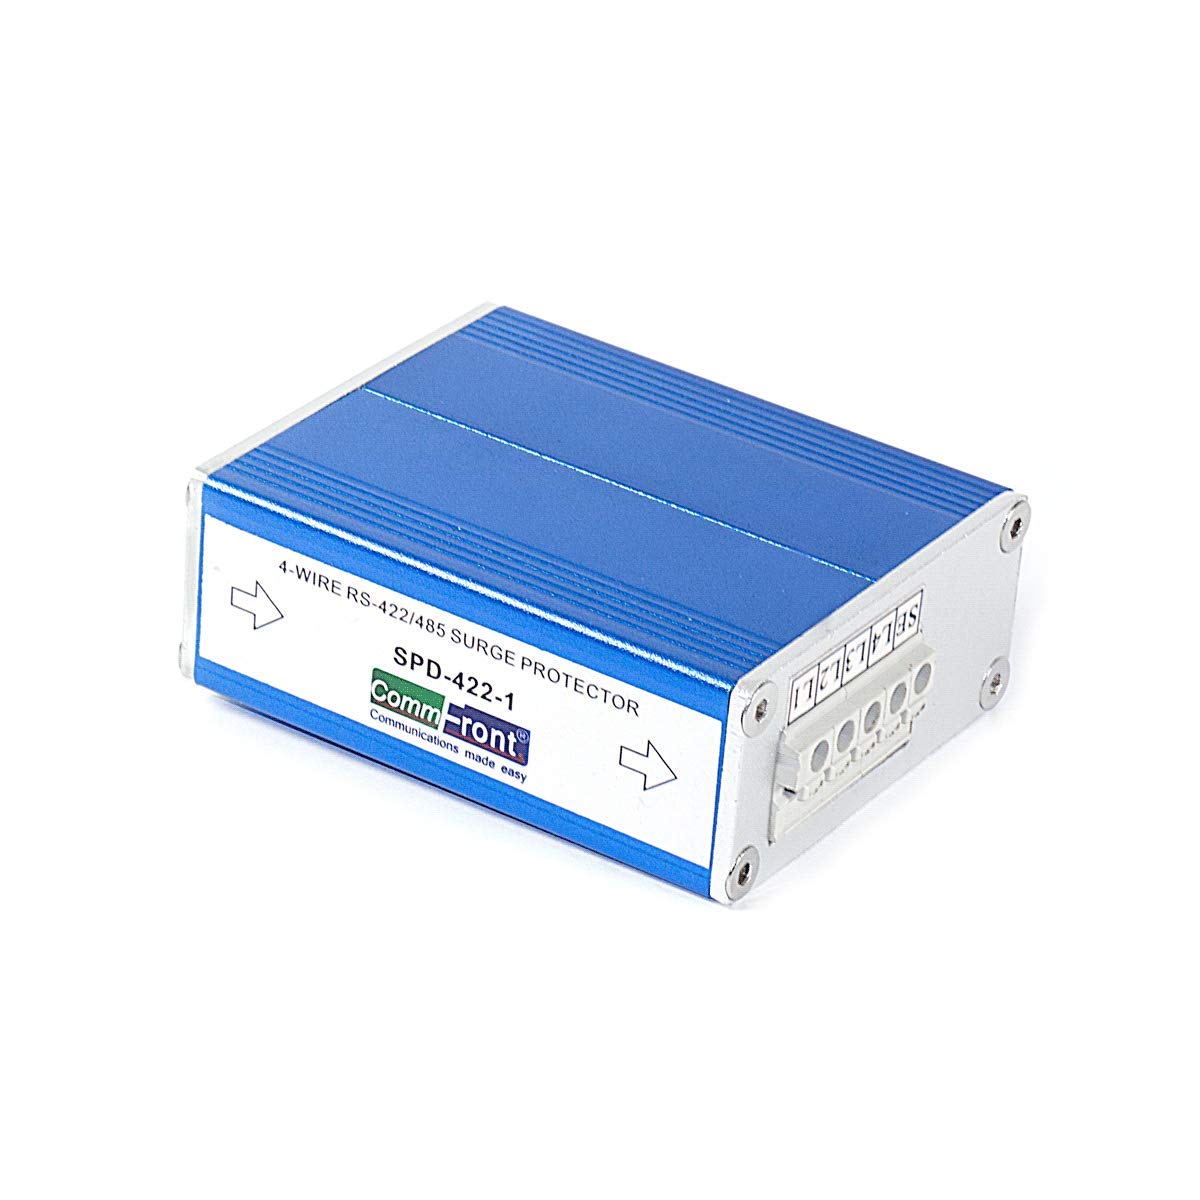 COMMFRONT Industrial 4-Wire RS422 / RS485 / RS232 Surge Protector, Passive, 3-Stage Surge Protection, DIN-Rail Mount